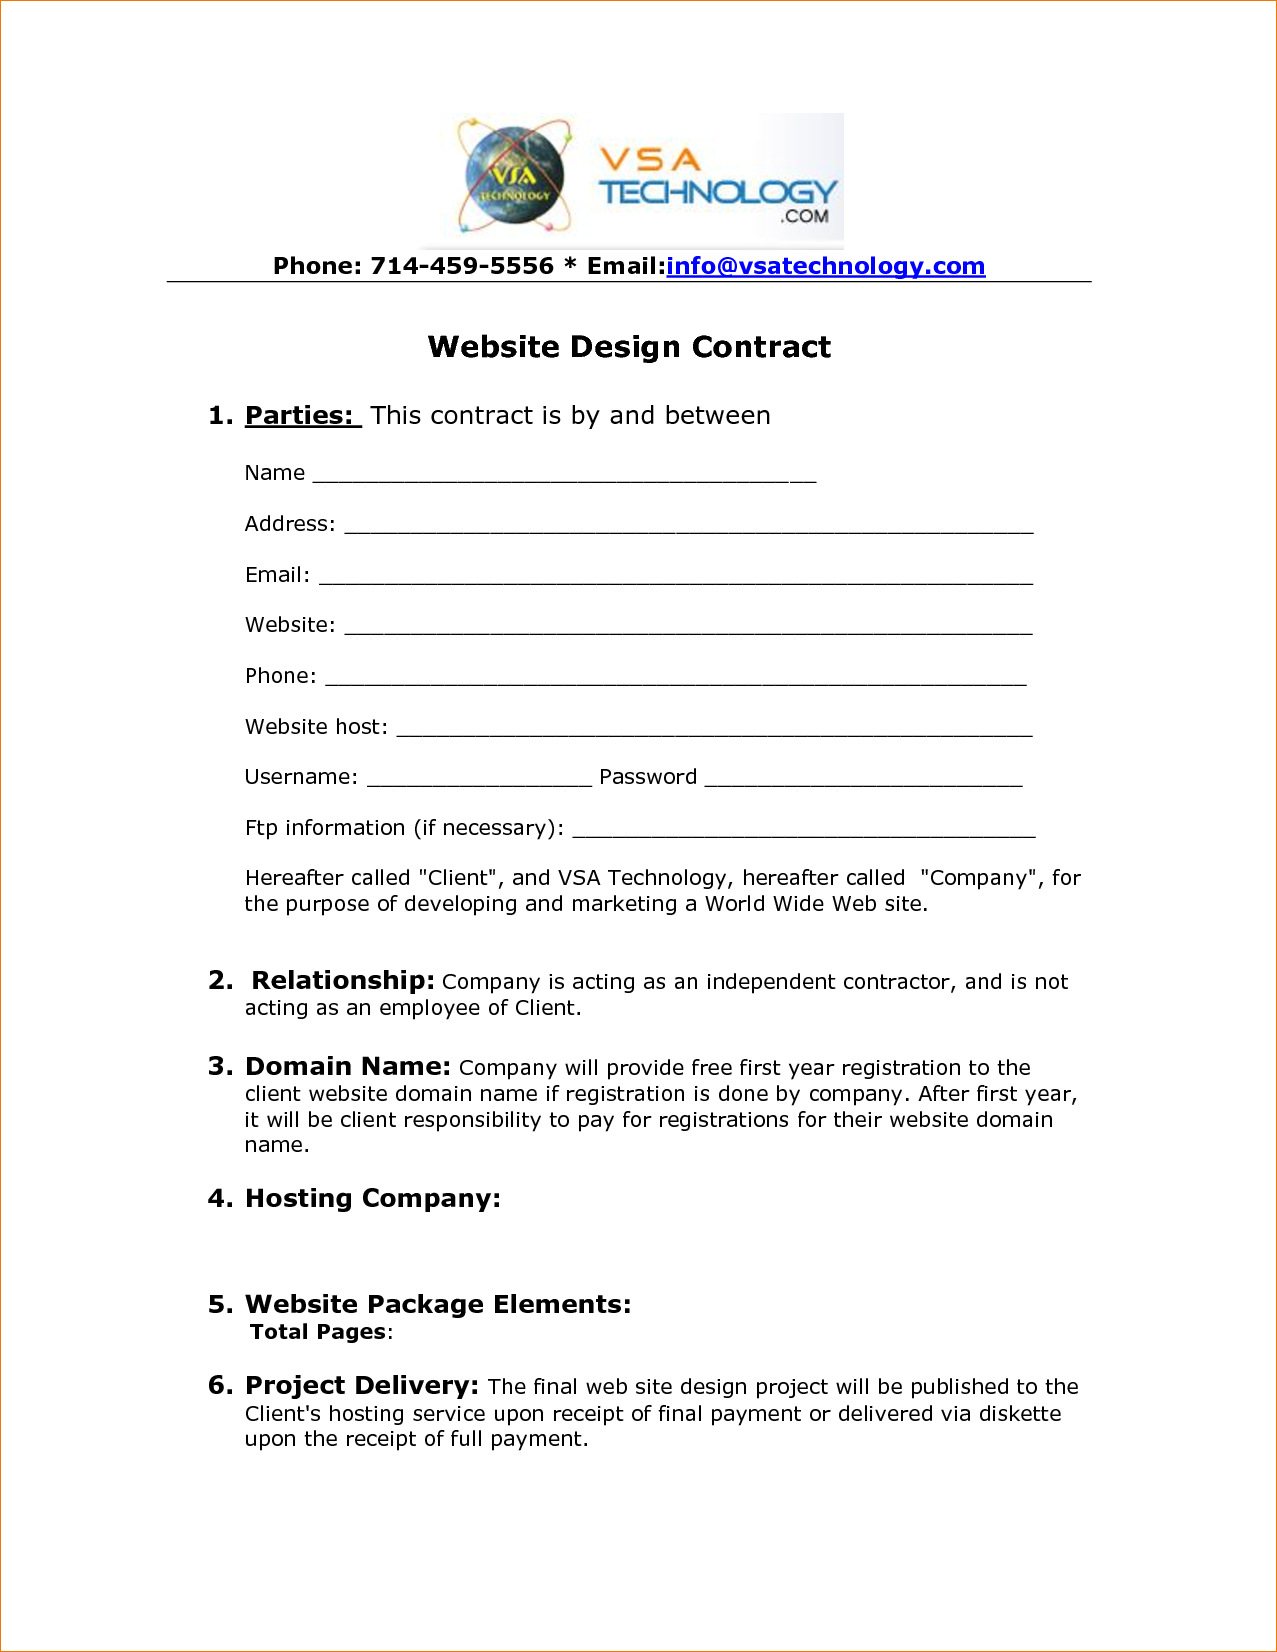 Email Contract Template With 7 Web Design Contract Template 